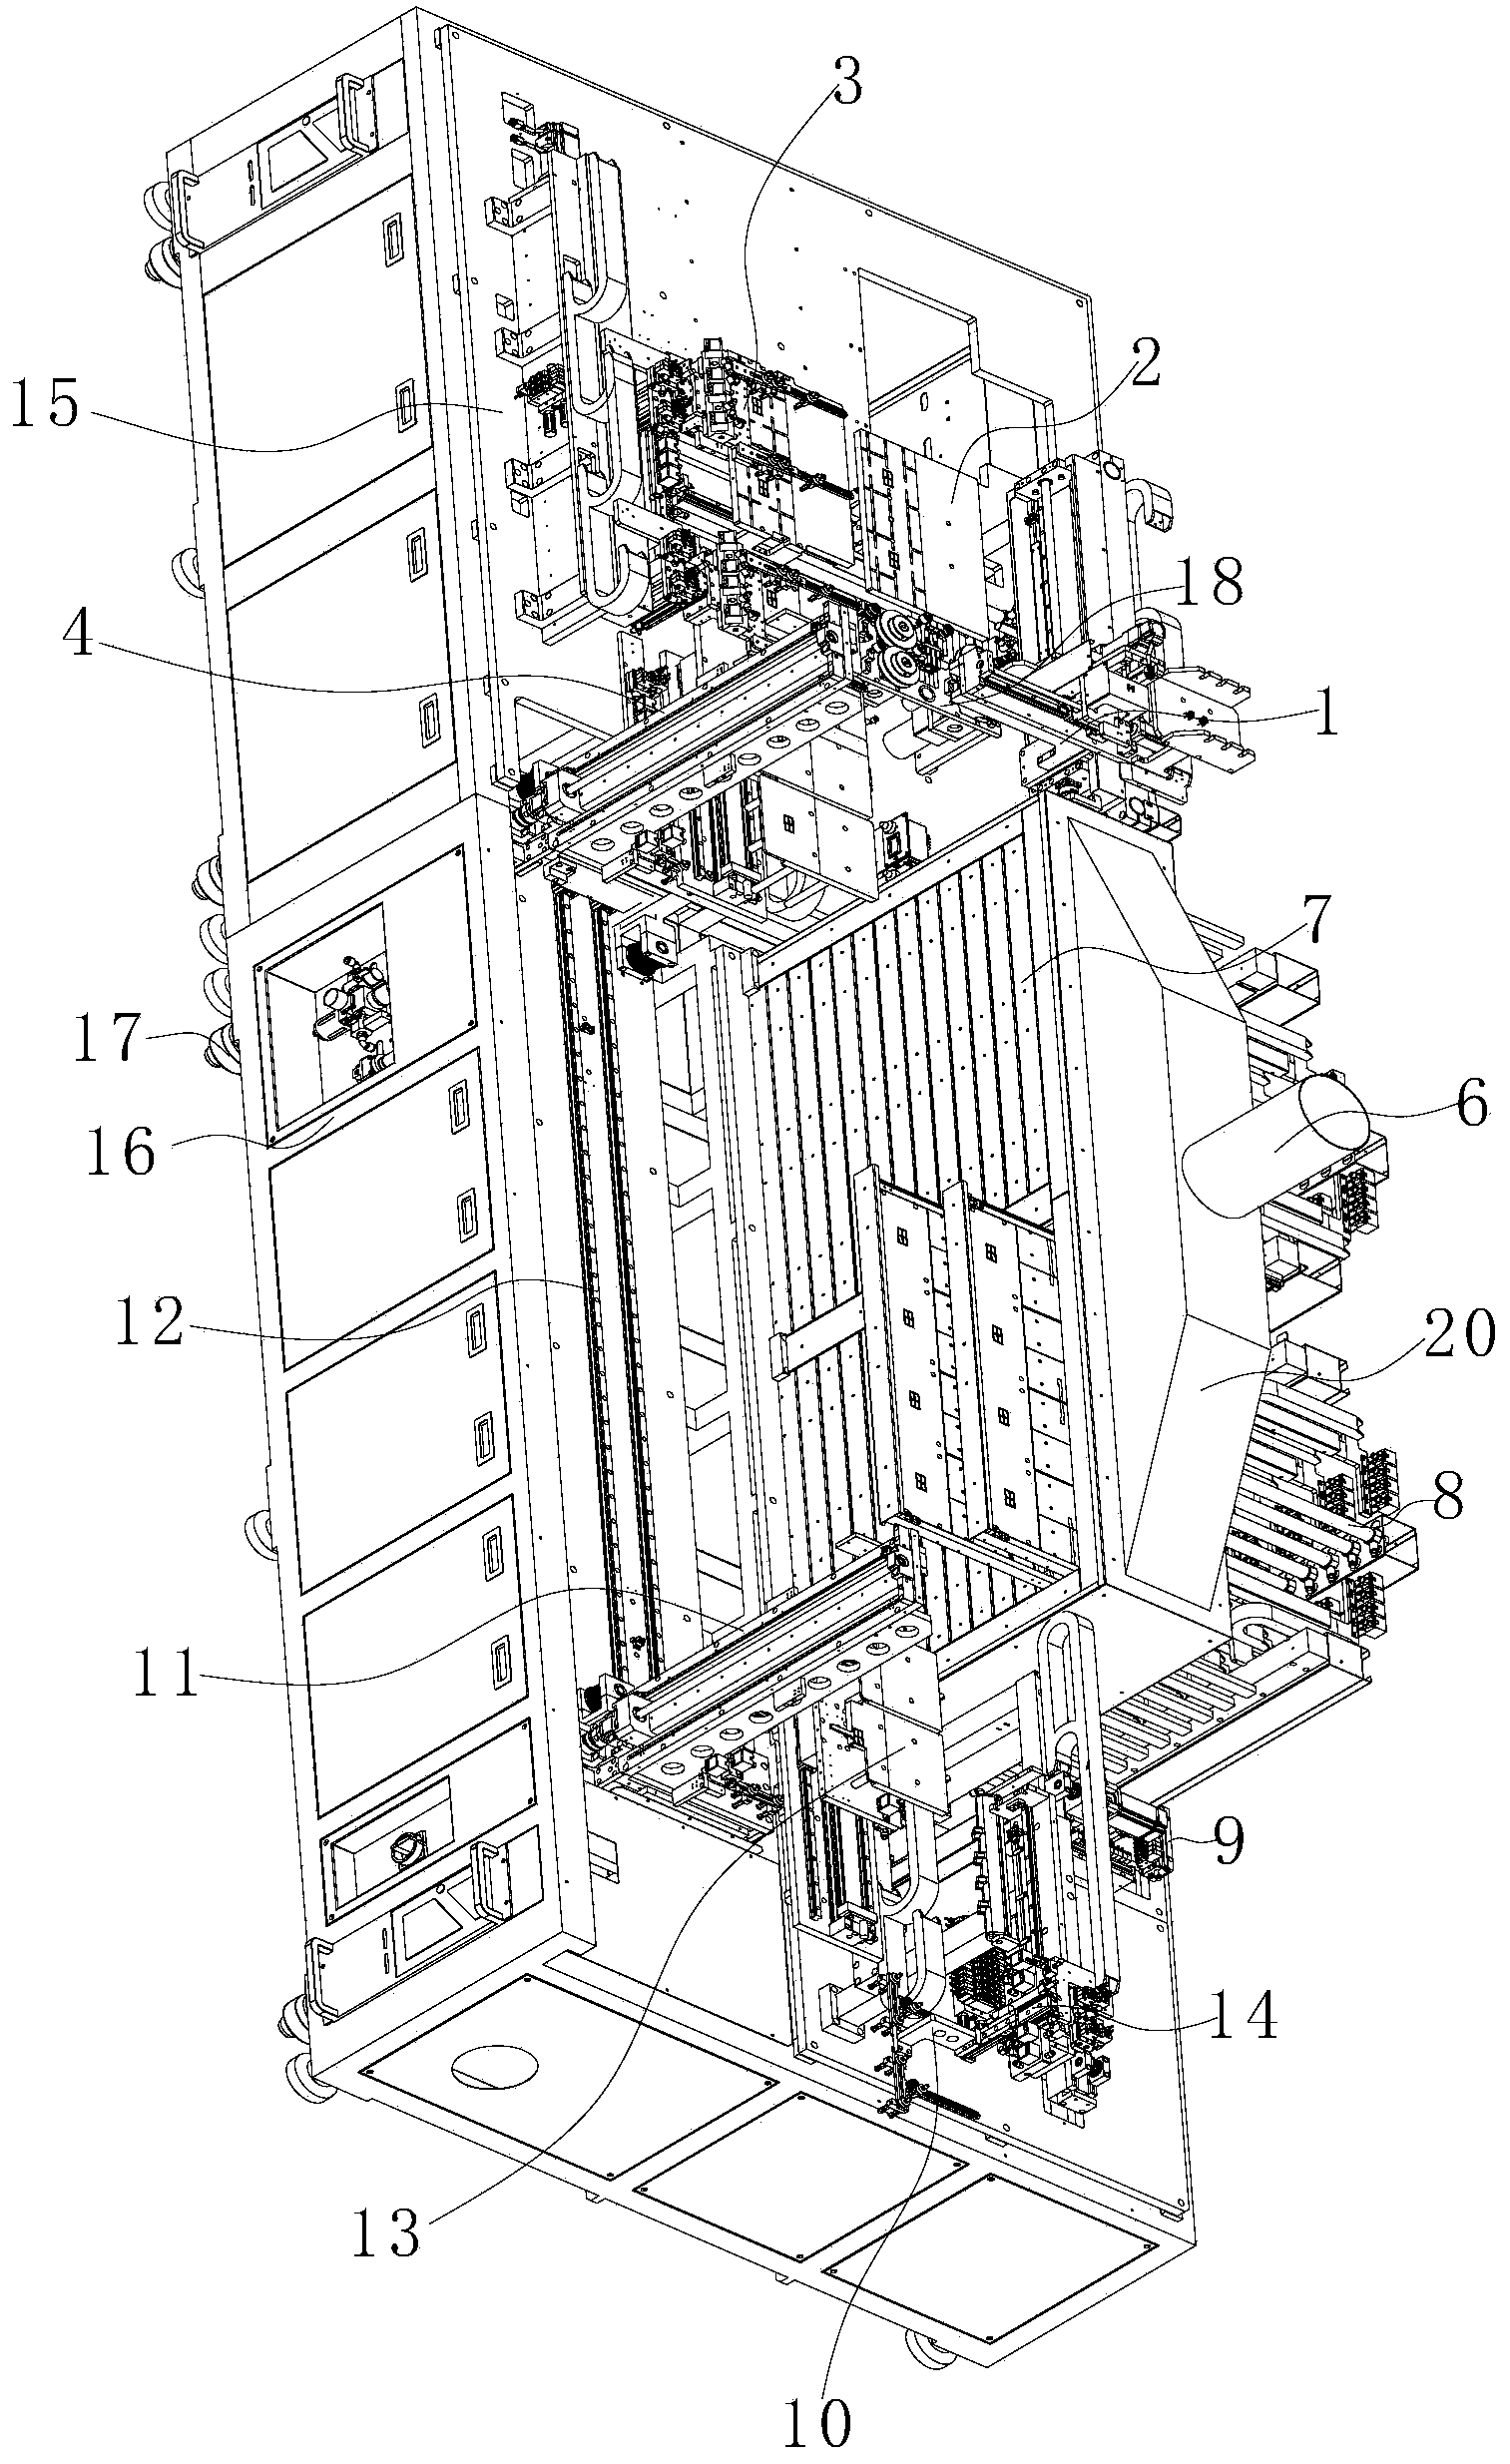 Multi-layer baking solidification dispensing machine achieving automatic feeding and discharging